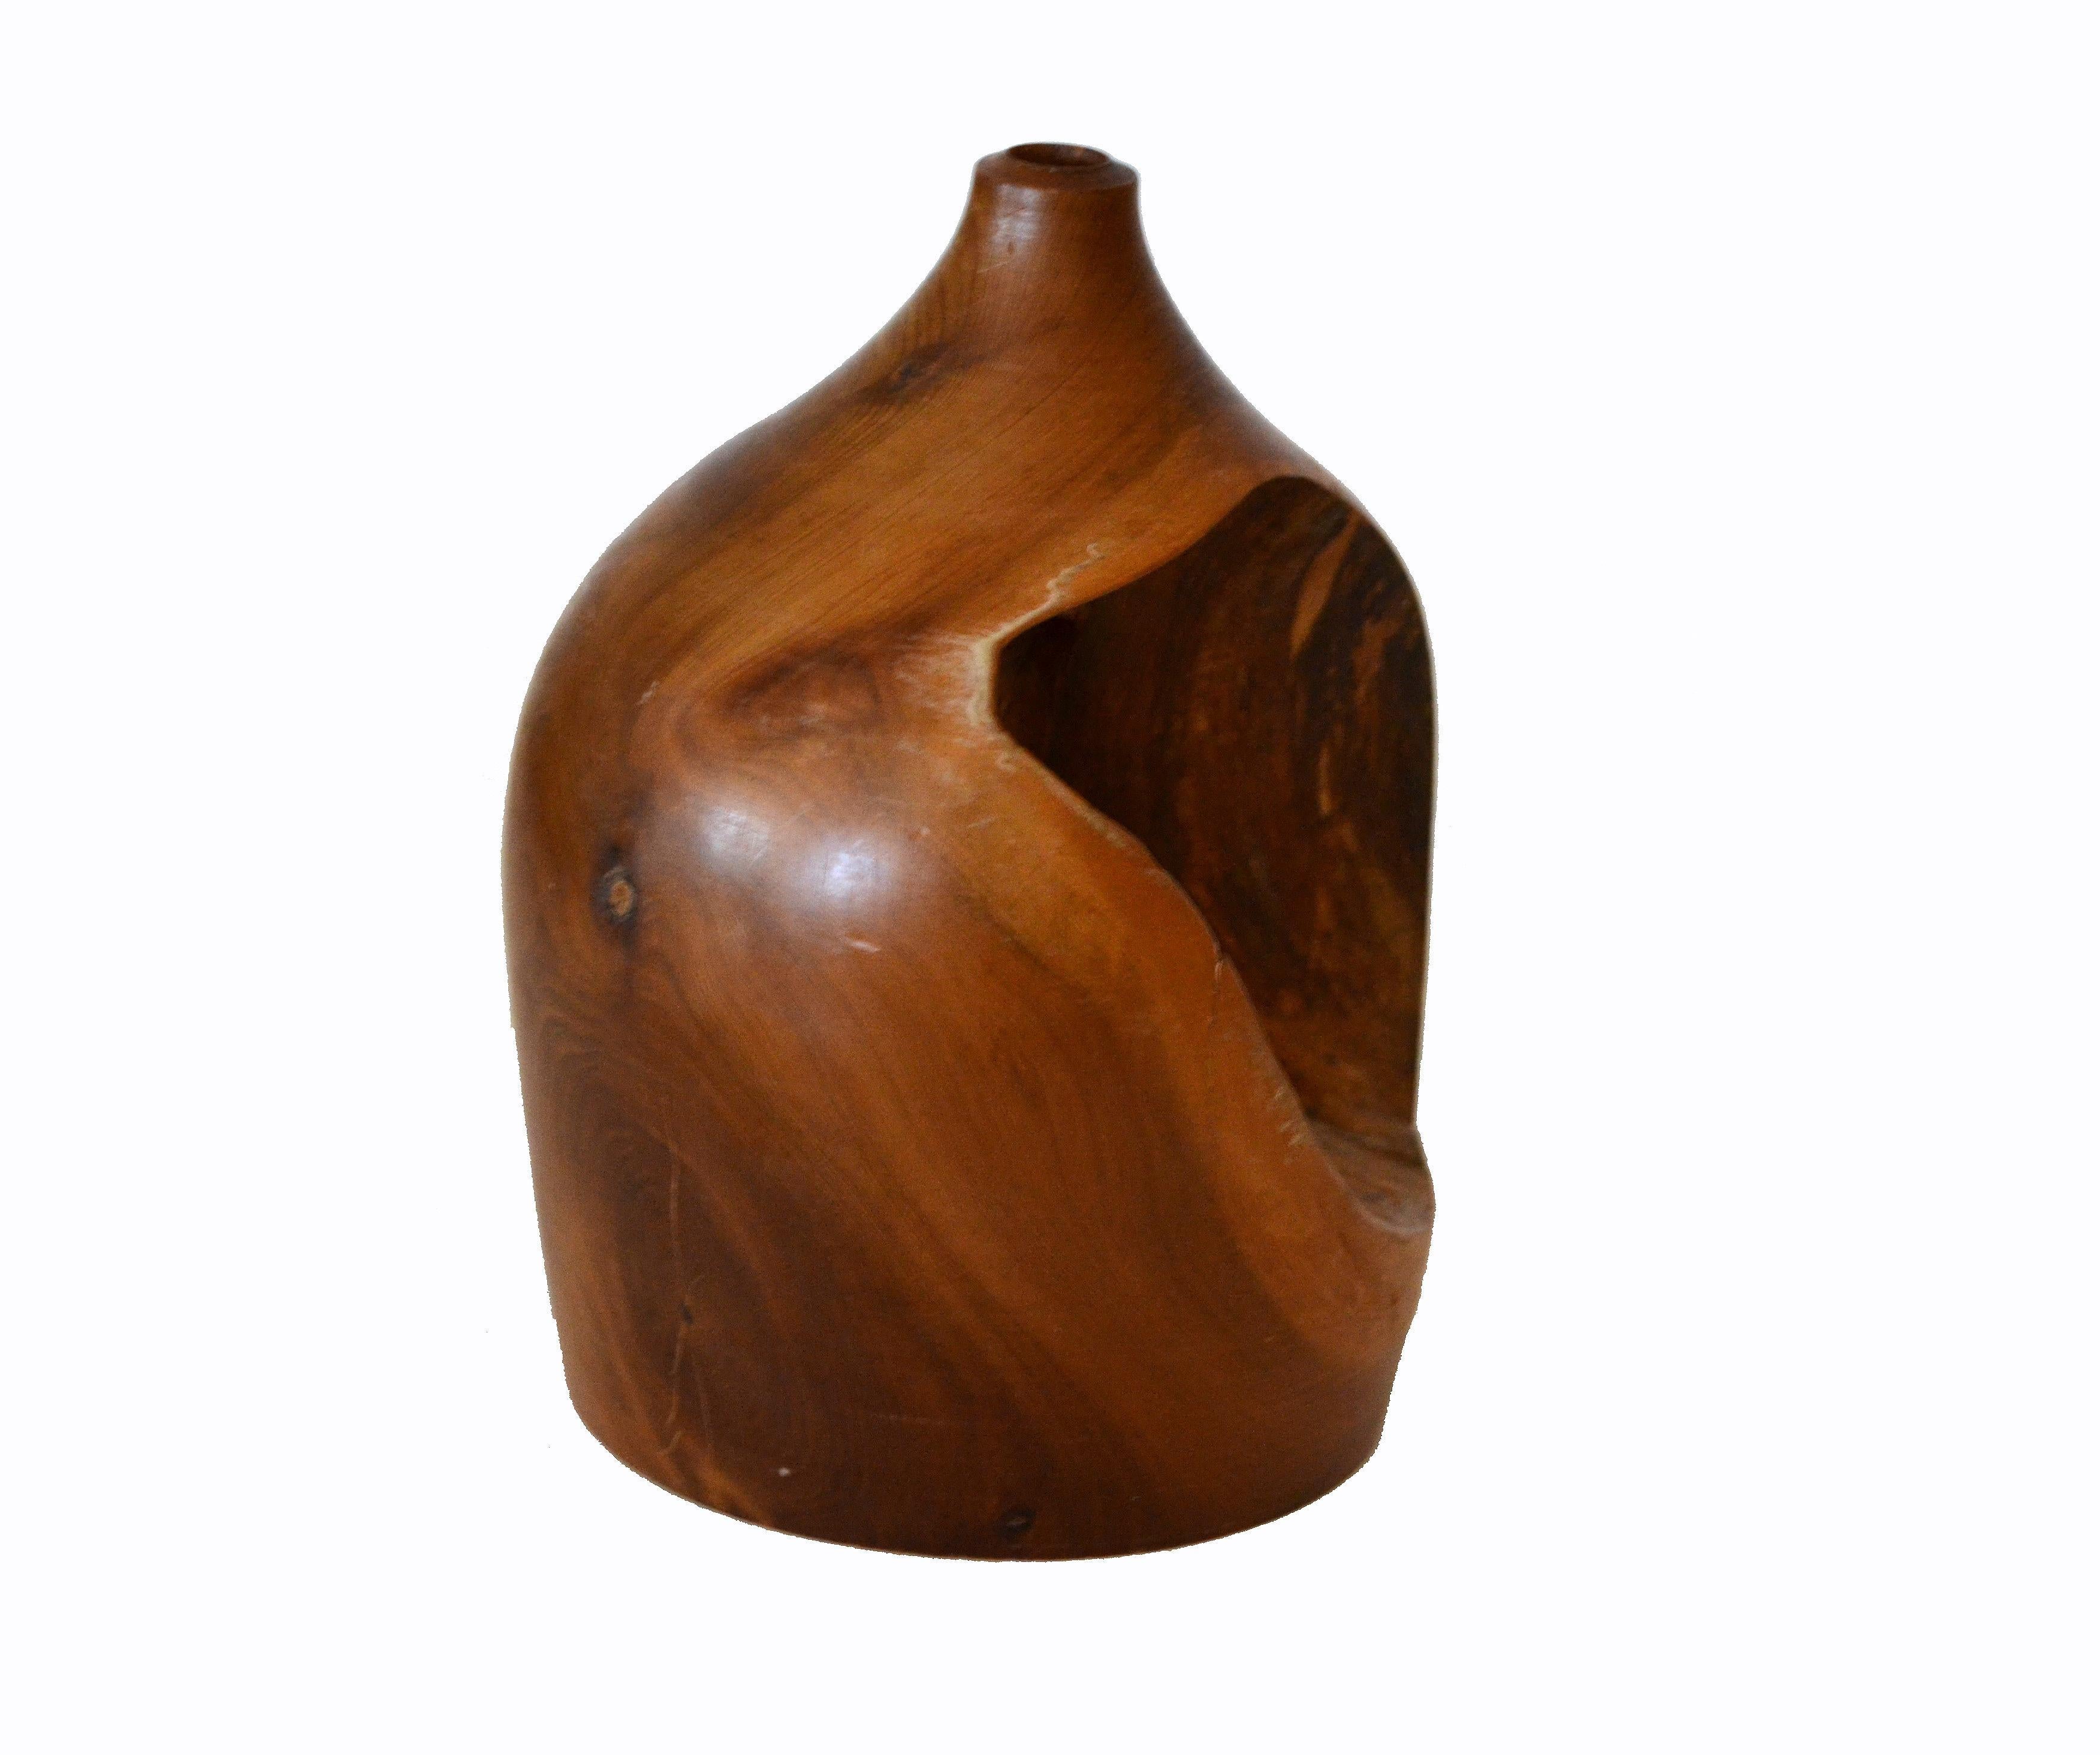 Rustic Vintage Handcrafted Cockhill Crafts Sculptural Turned Yew Wood Vase England 1960